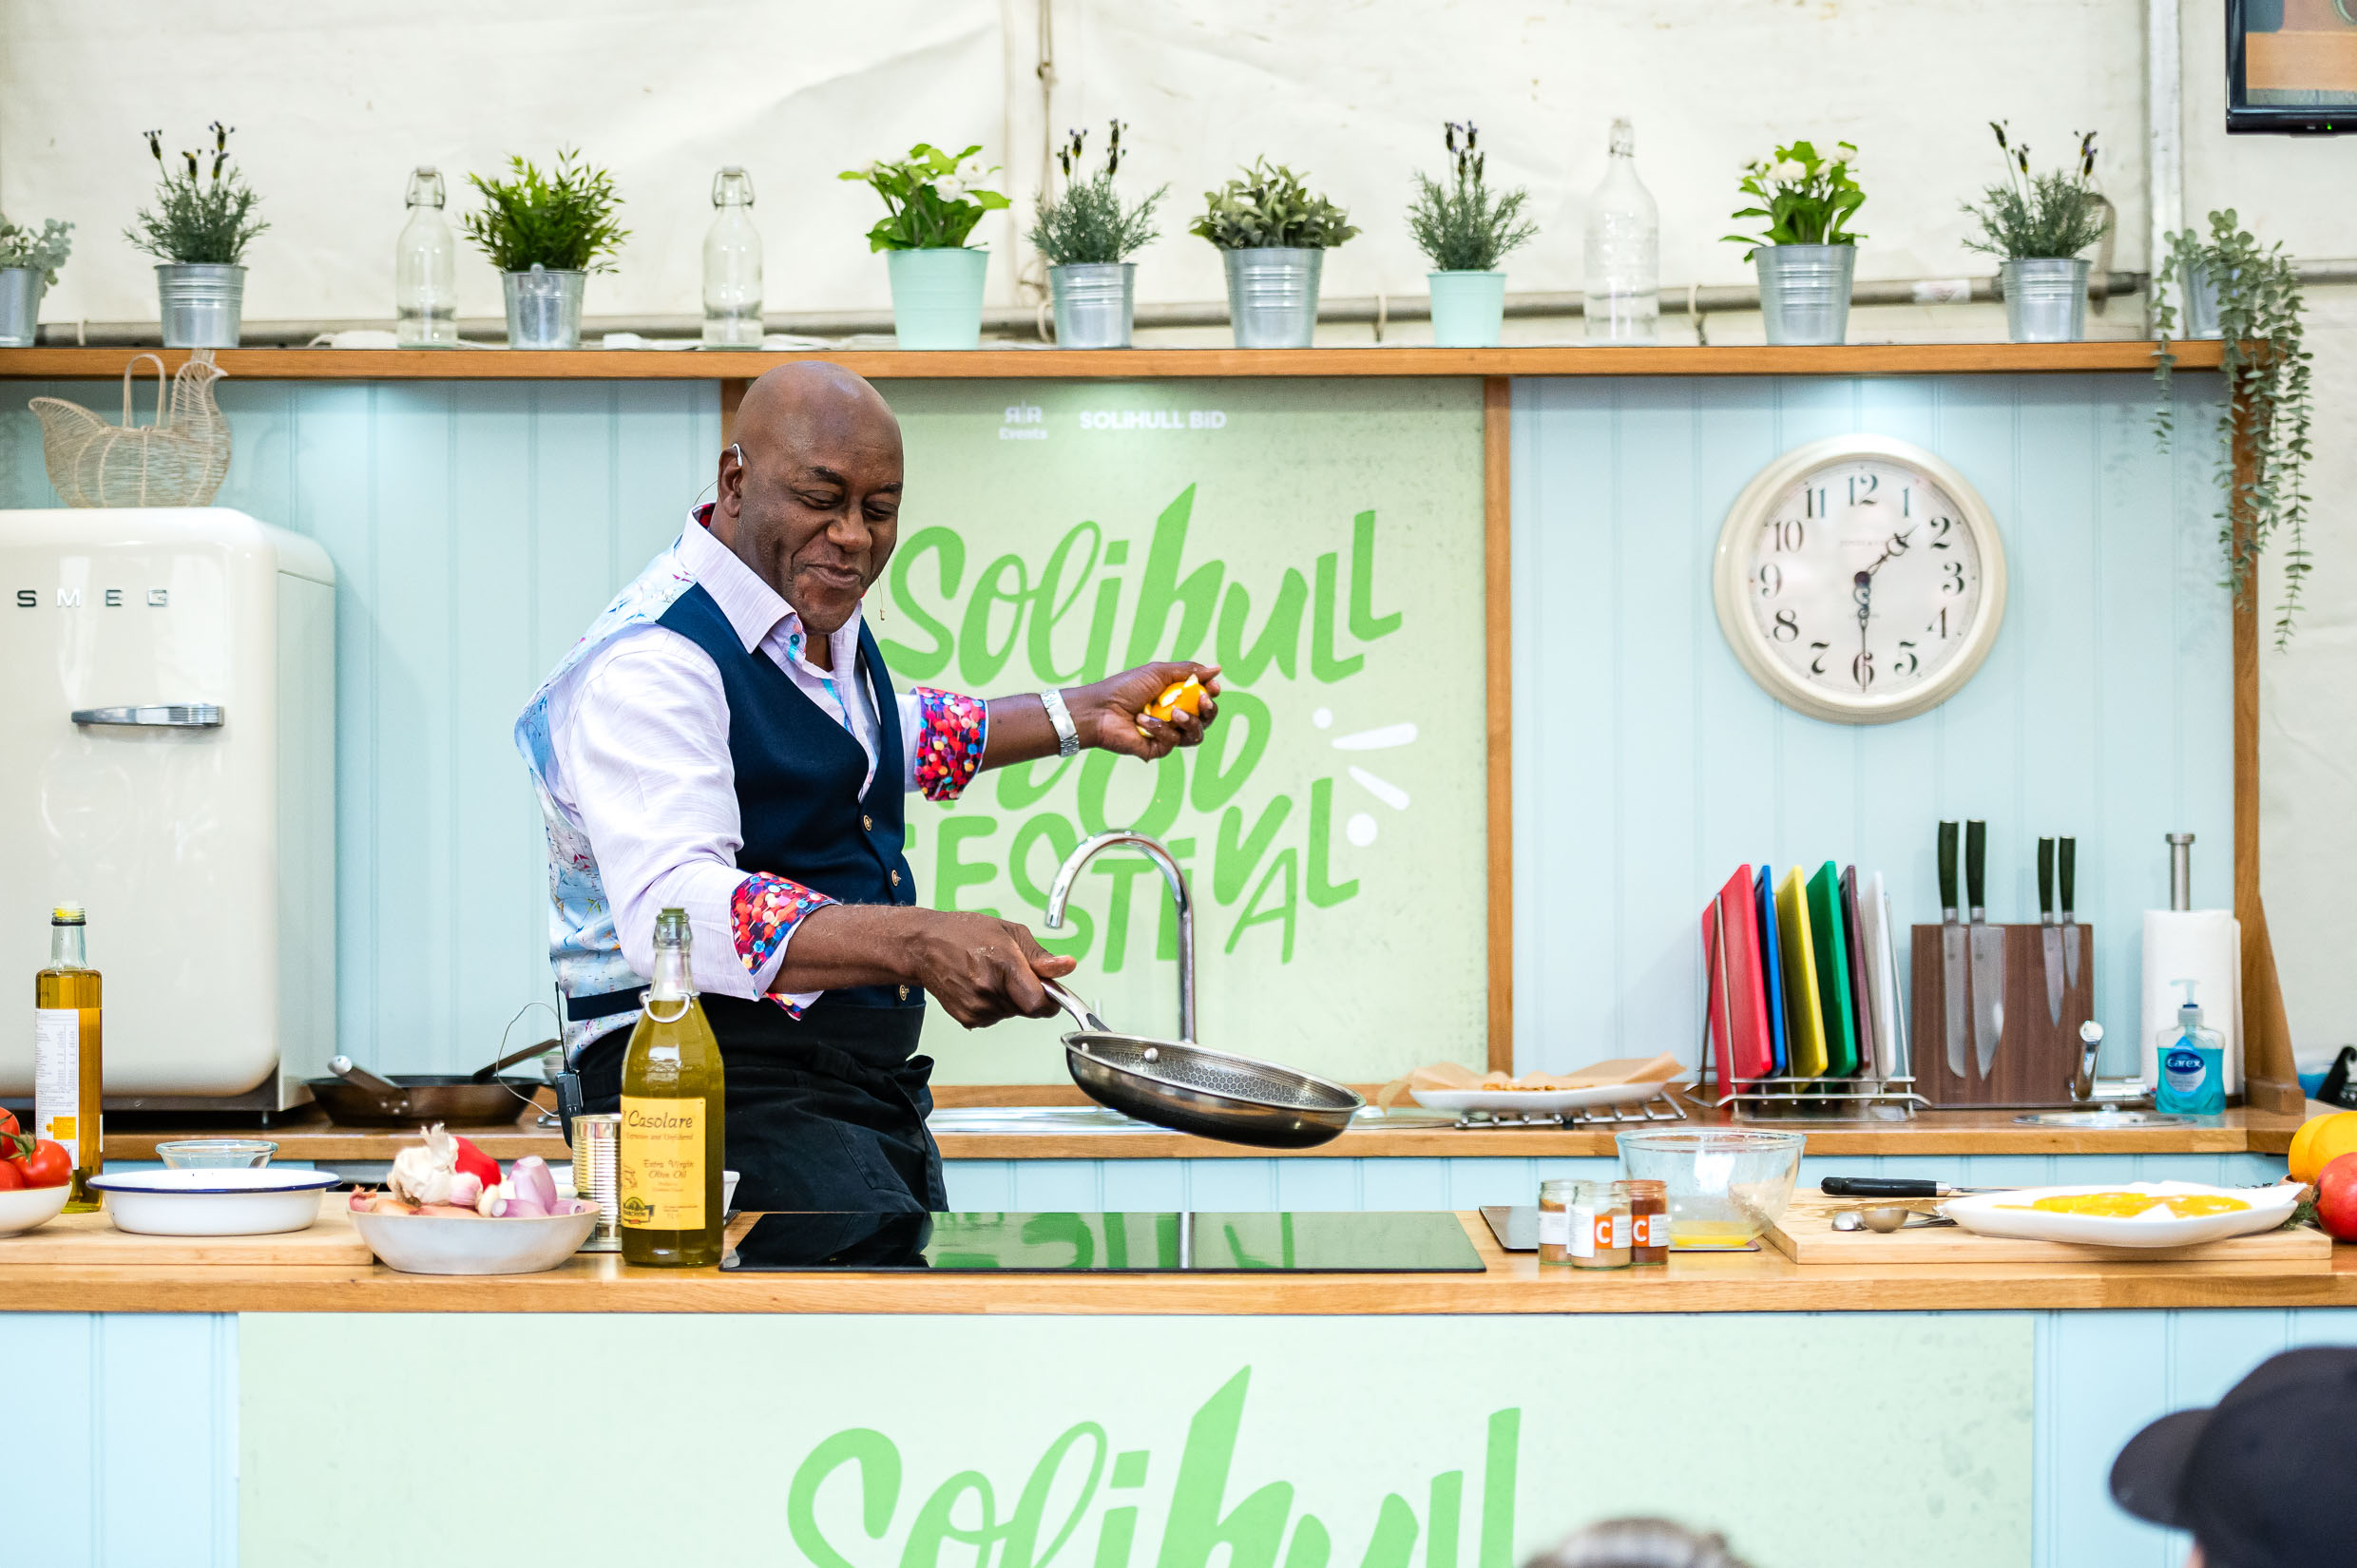 Solihull town centre celebrates Food Festival return in style